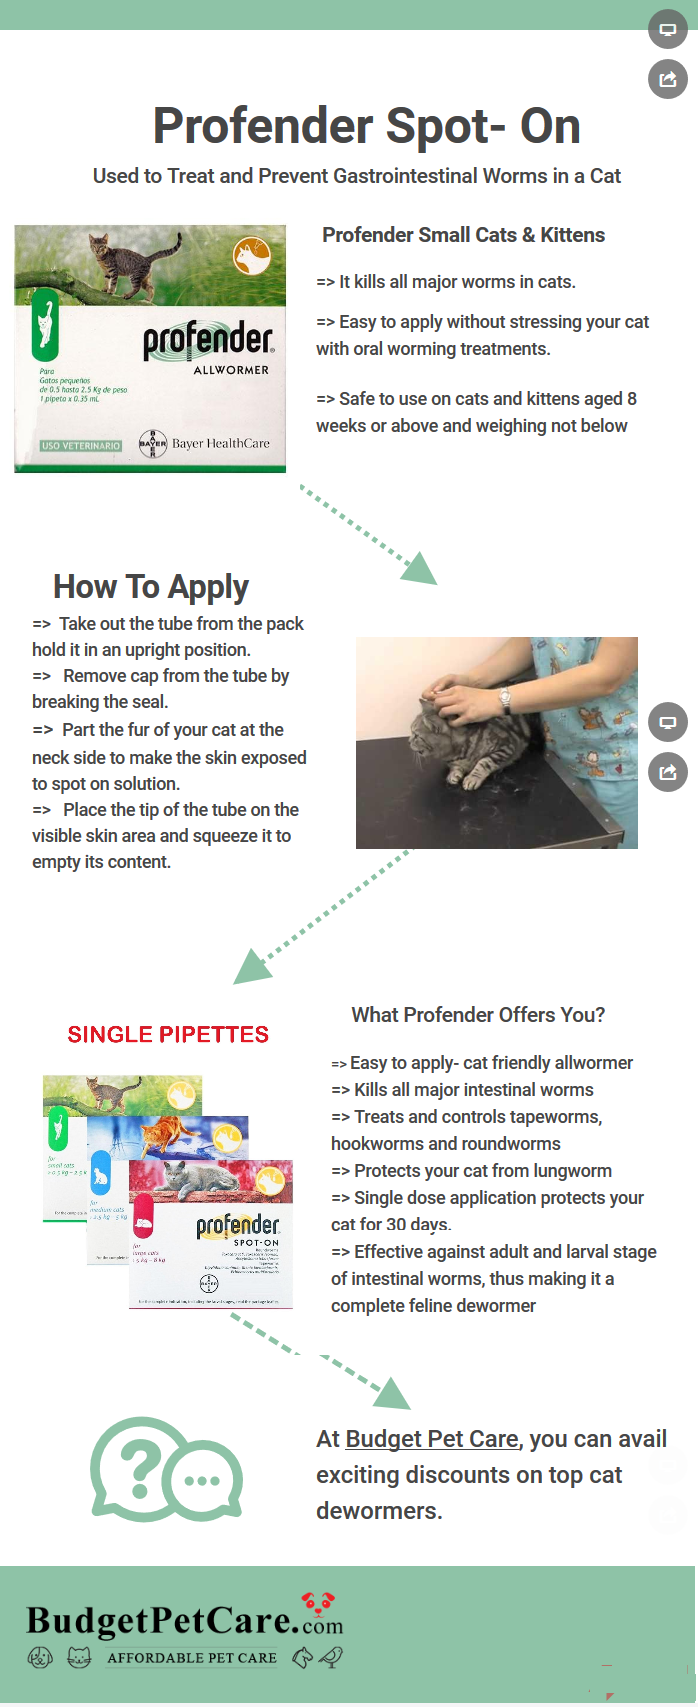 Profender Spot on For Cats by Budget PetCare